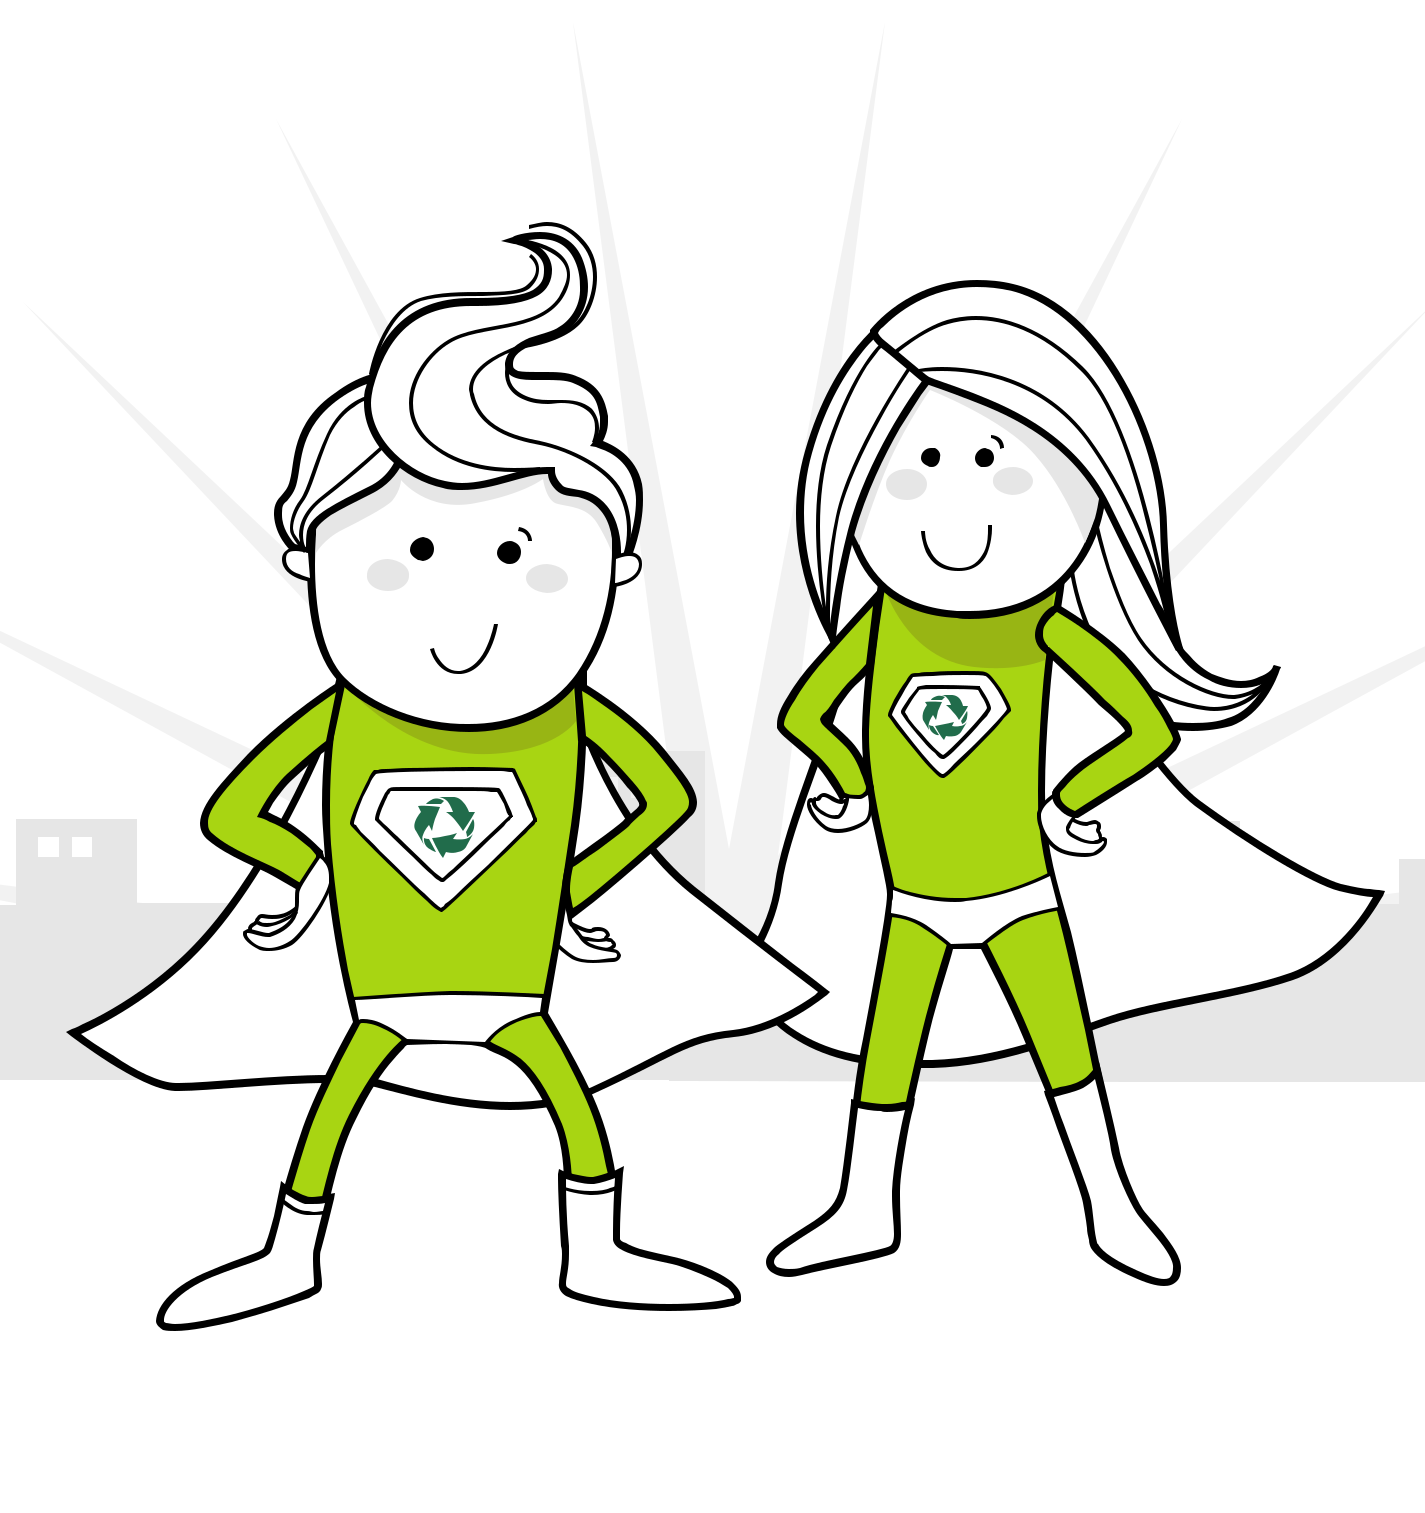 Illustration of Green girl and Green boy